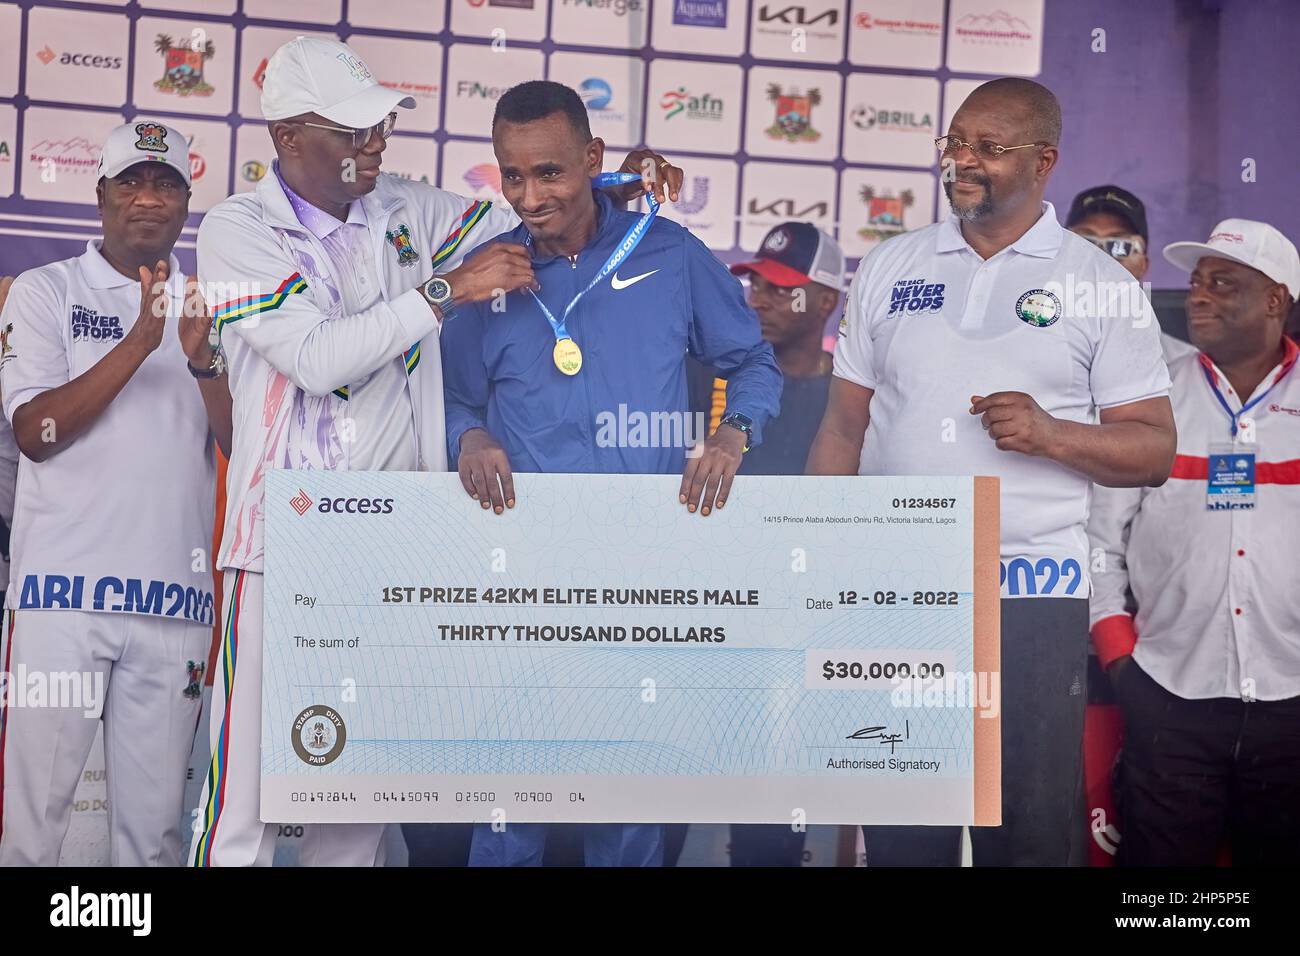 1st place marathon winner, Geleta Ulfata receives a medal and prize money after competing in the Access Bank Lagos City Marathon on February 12, 2022. Stock Photo